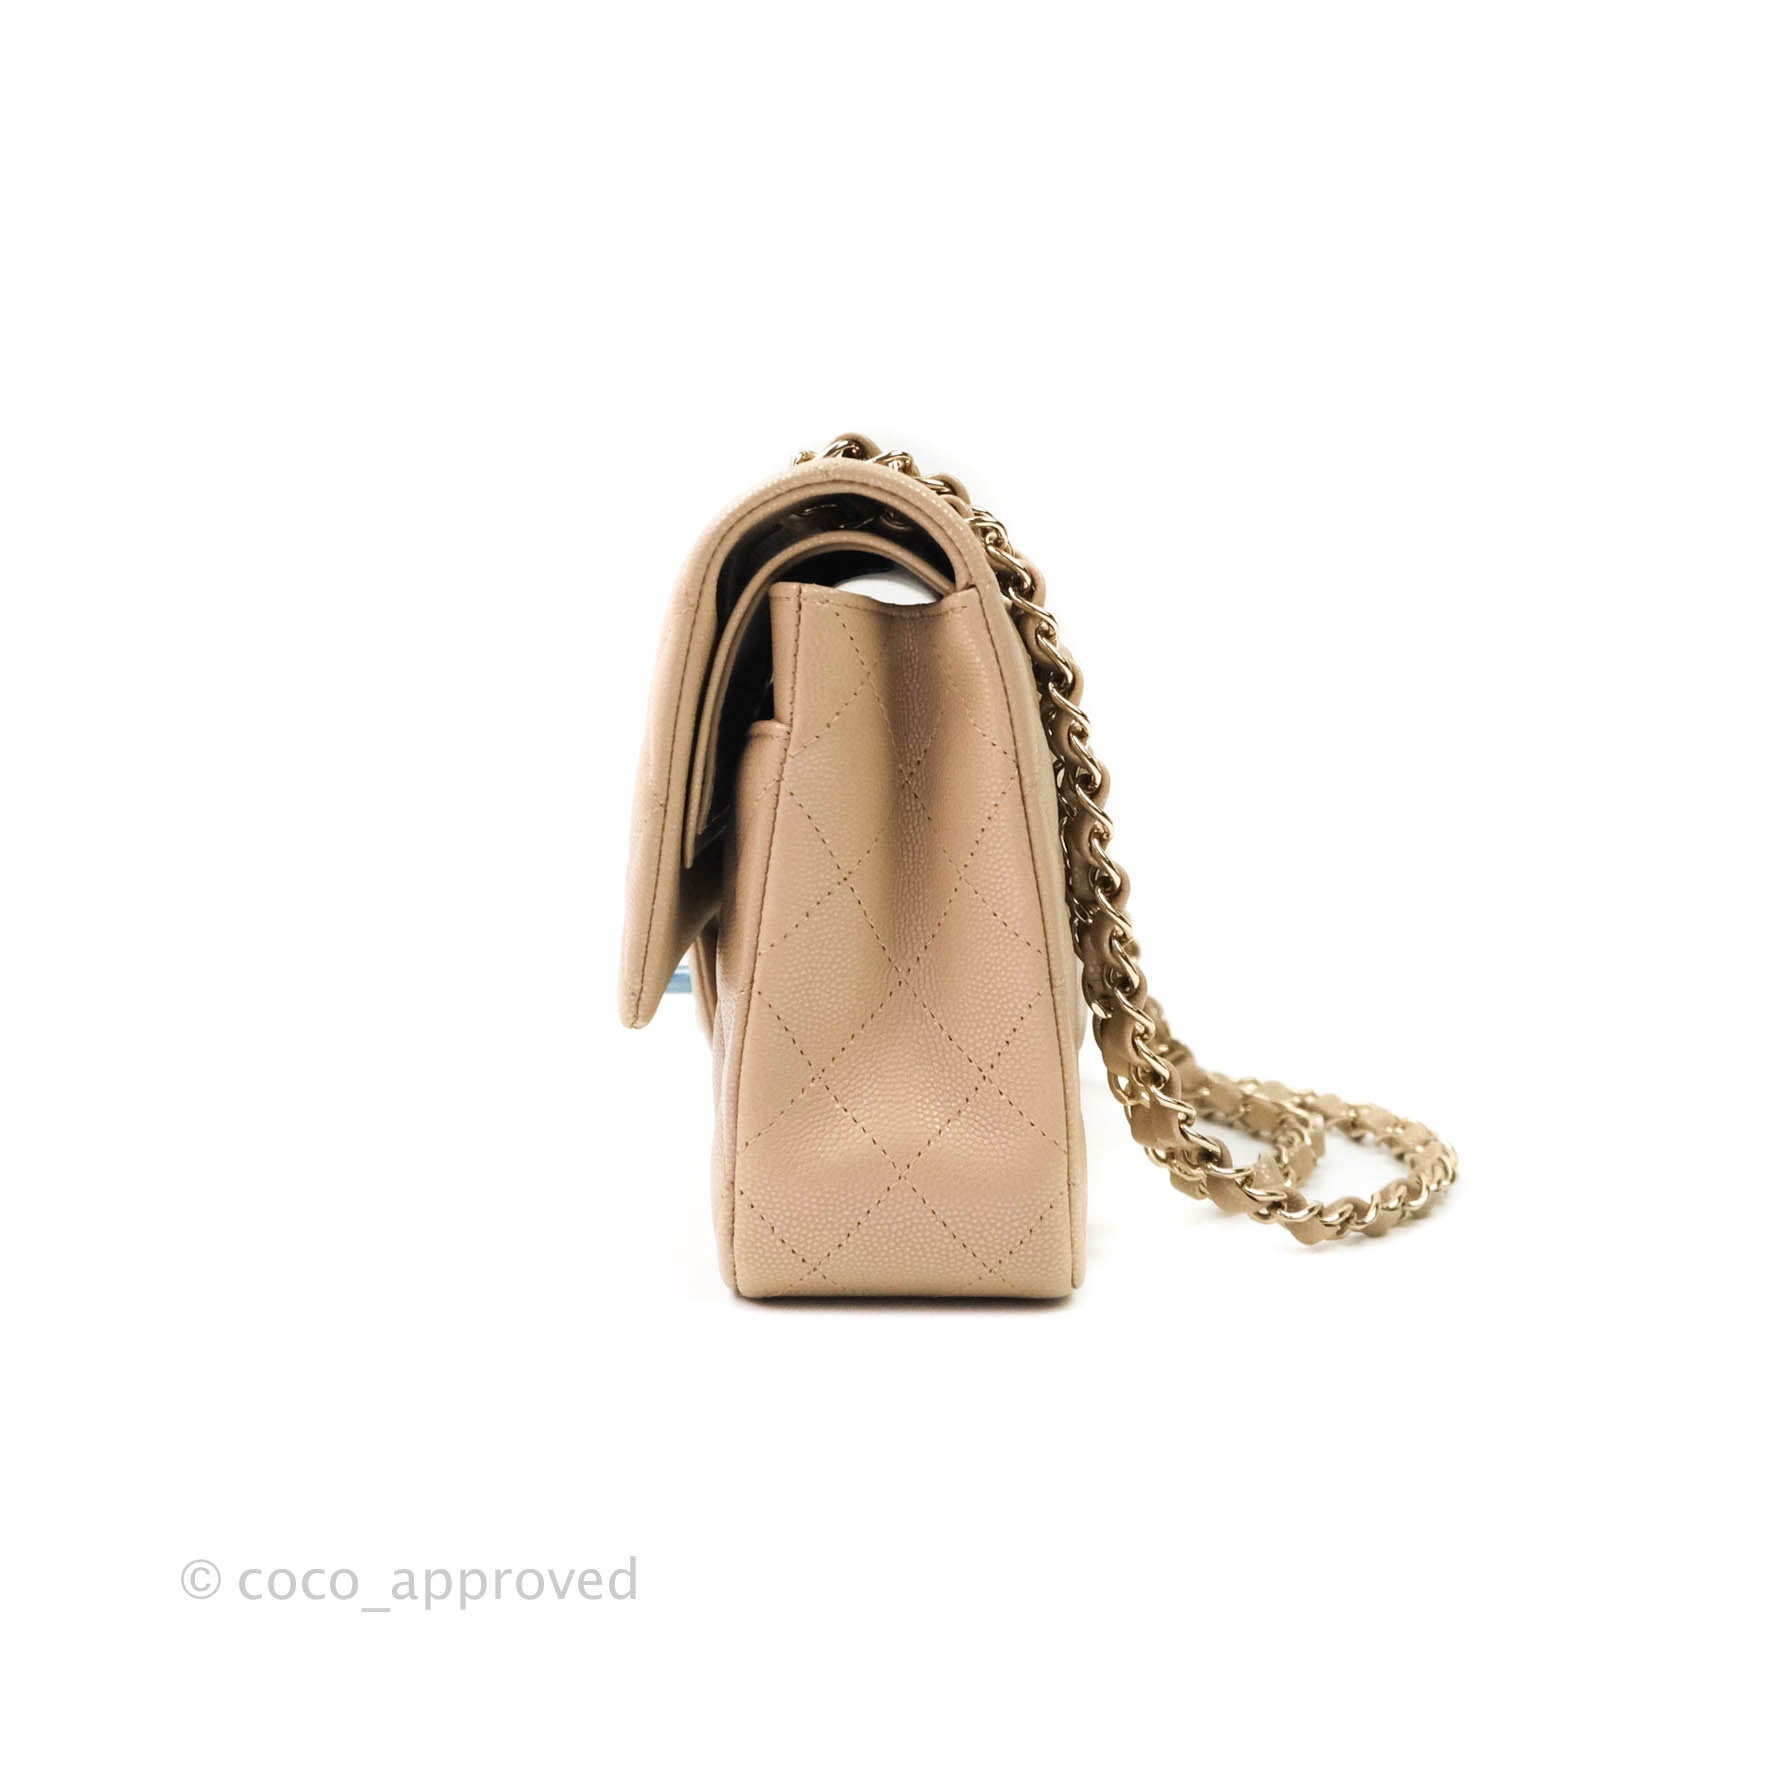 chanel canvas pouch